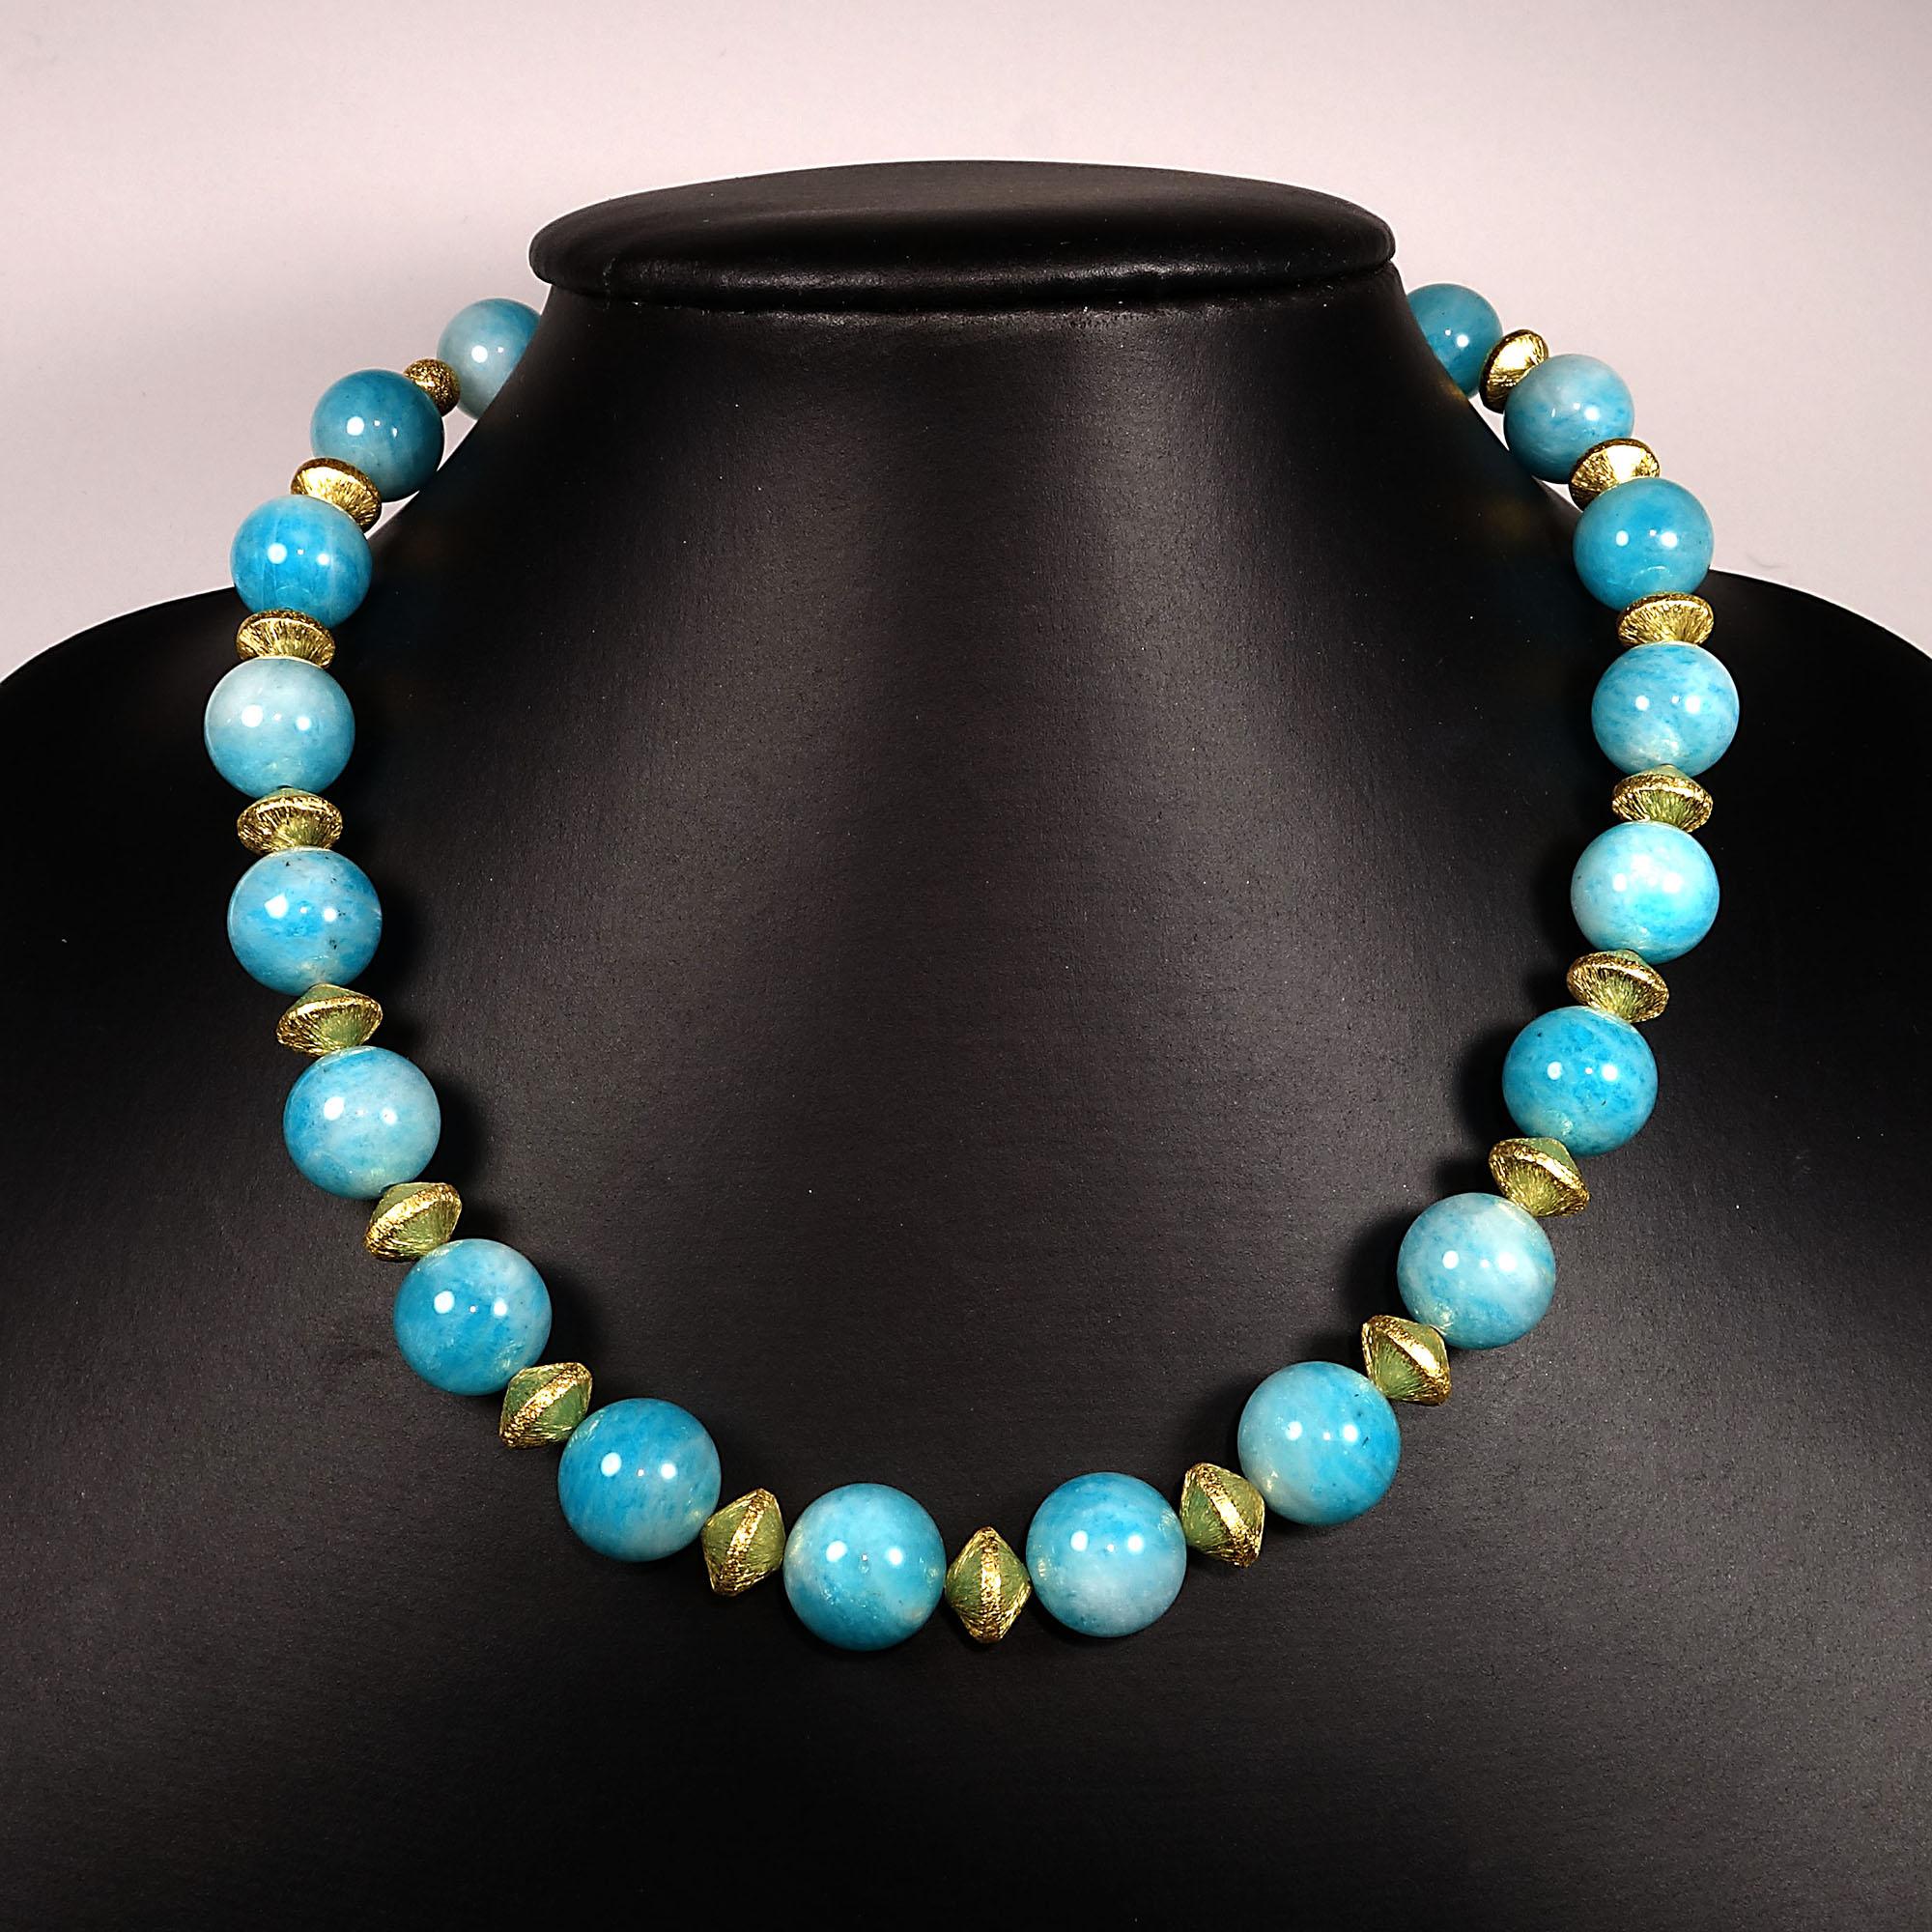 Women's or Men's Gemjunky Choker Necklace of Glowing Amazonite with Gold Tone Accents